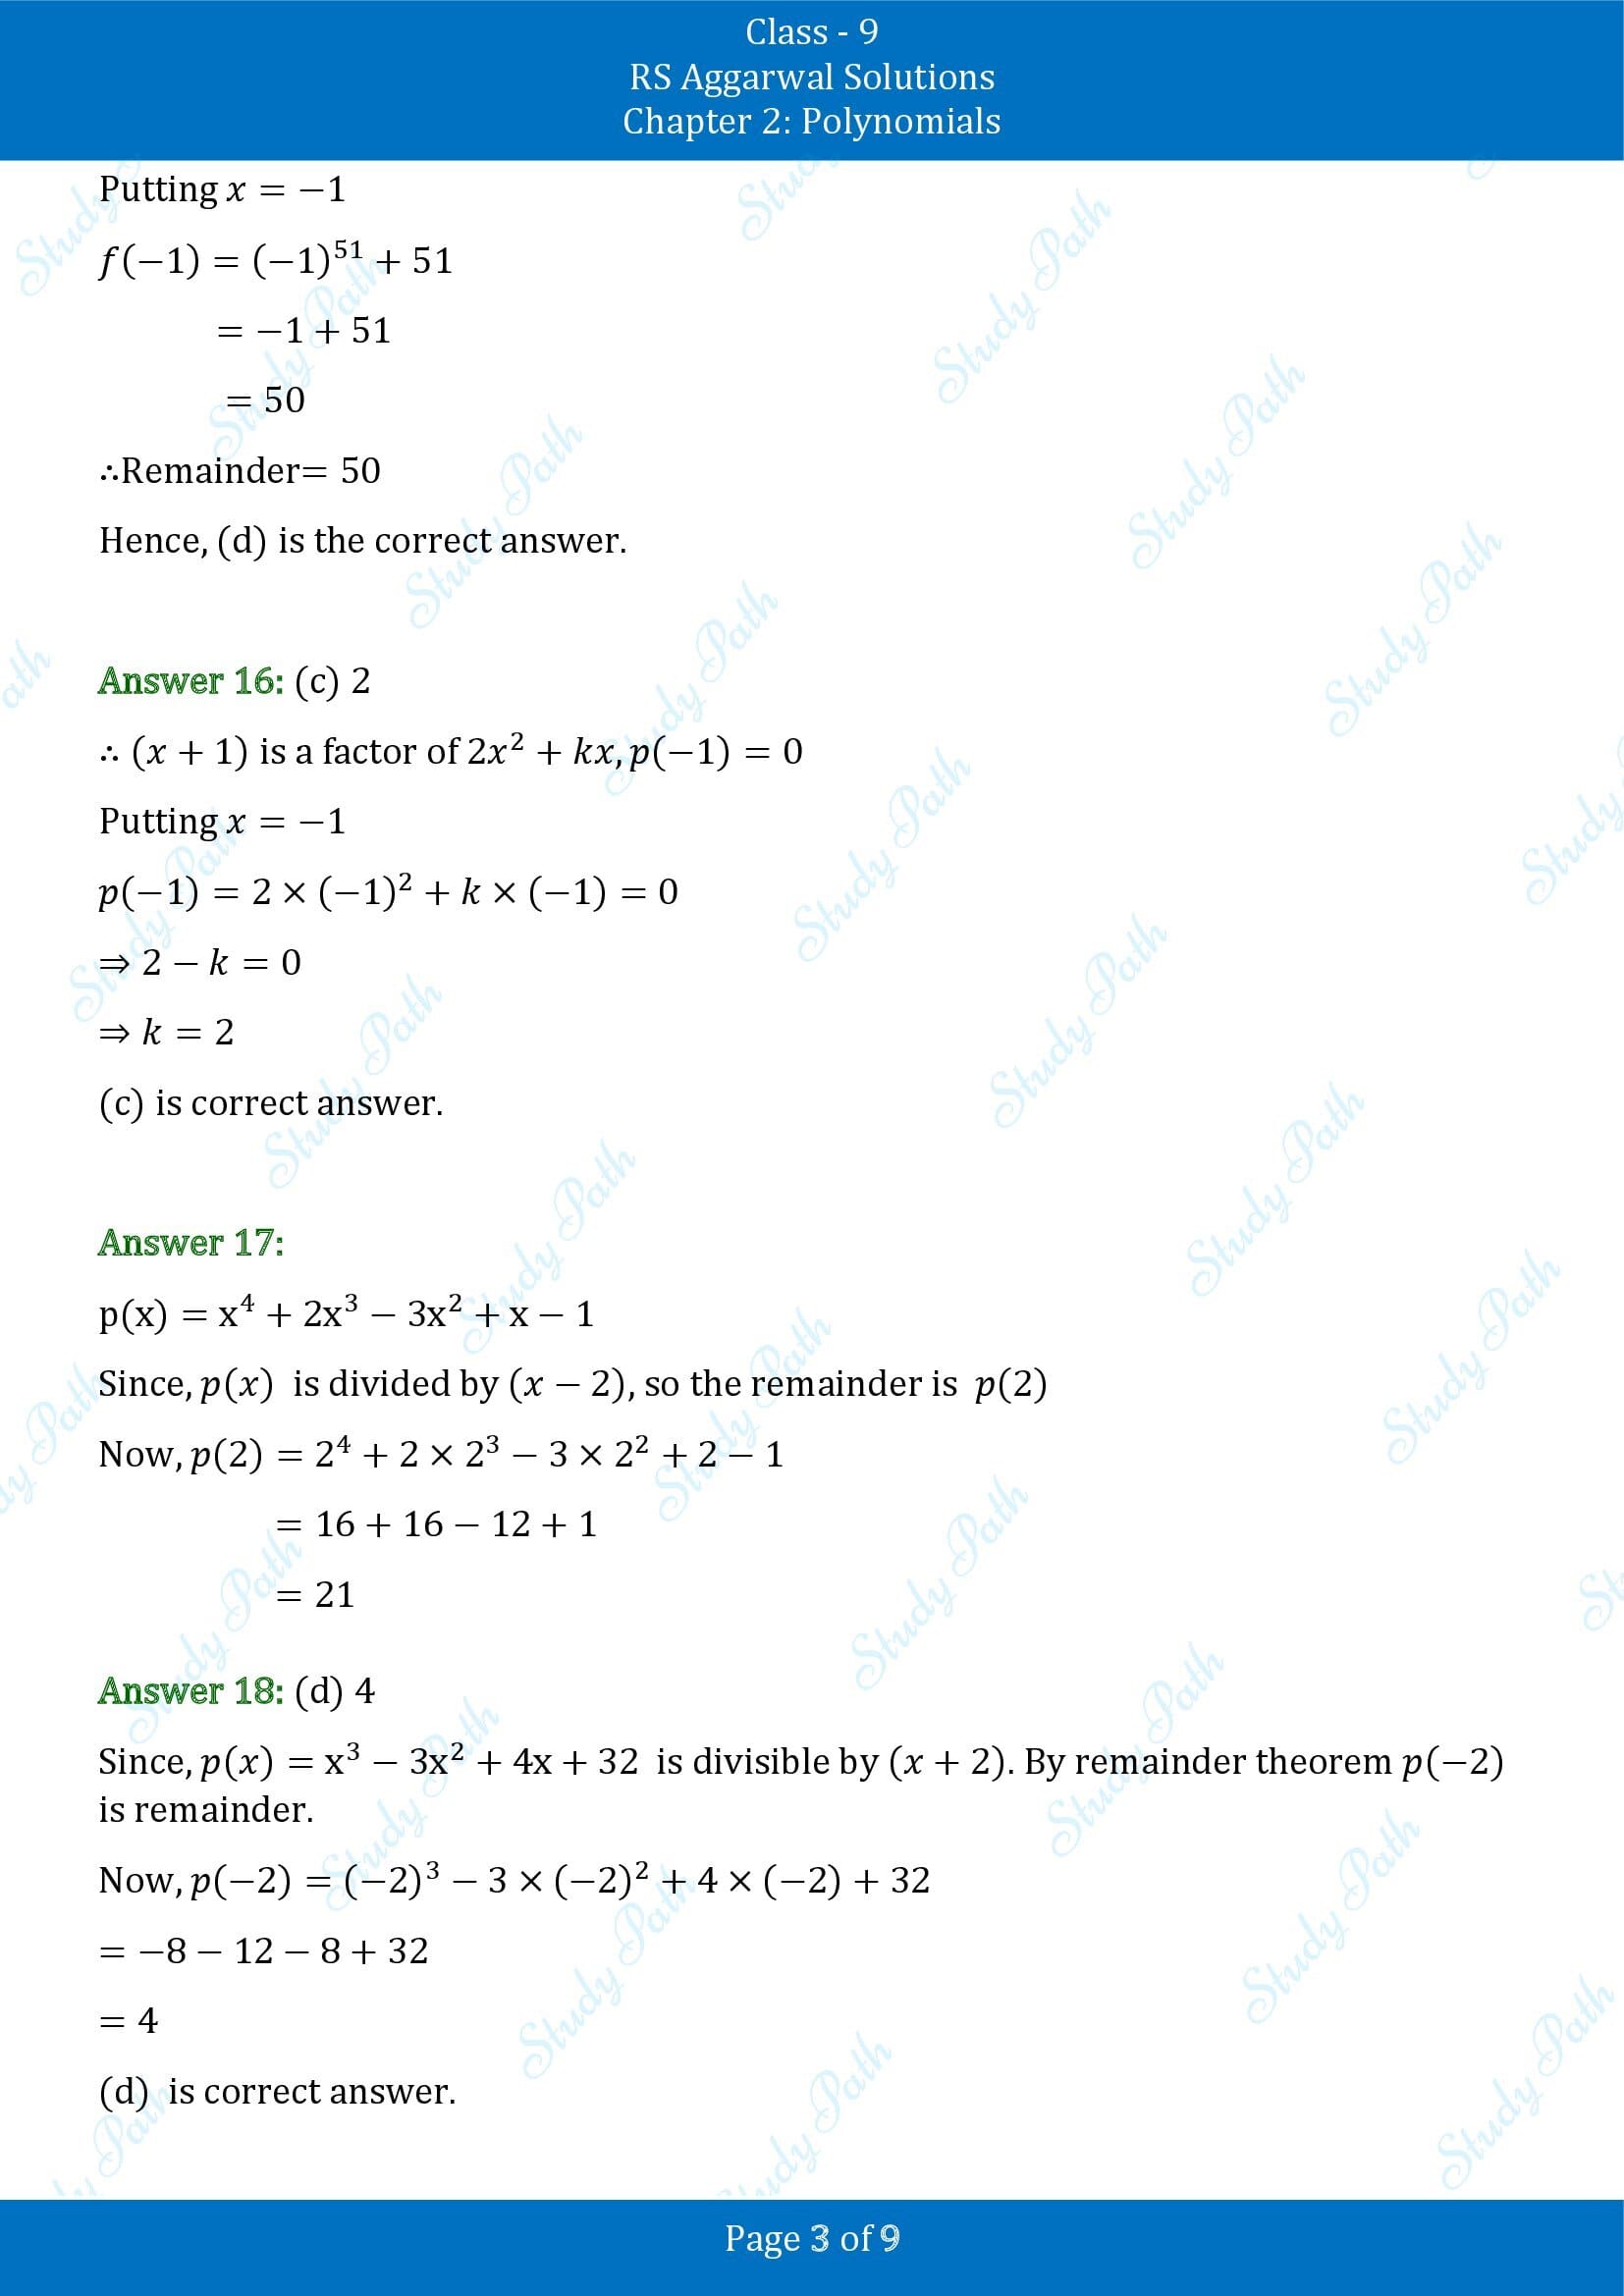 RS Aggarwal Solutions Class 9 Chapter 2 Polynomials Multiple Choice Questions MCQs 00003